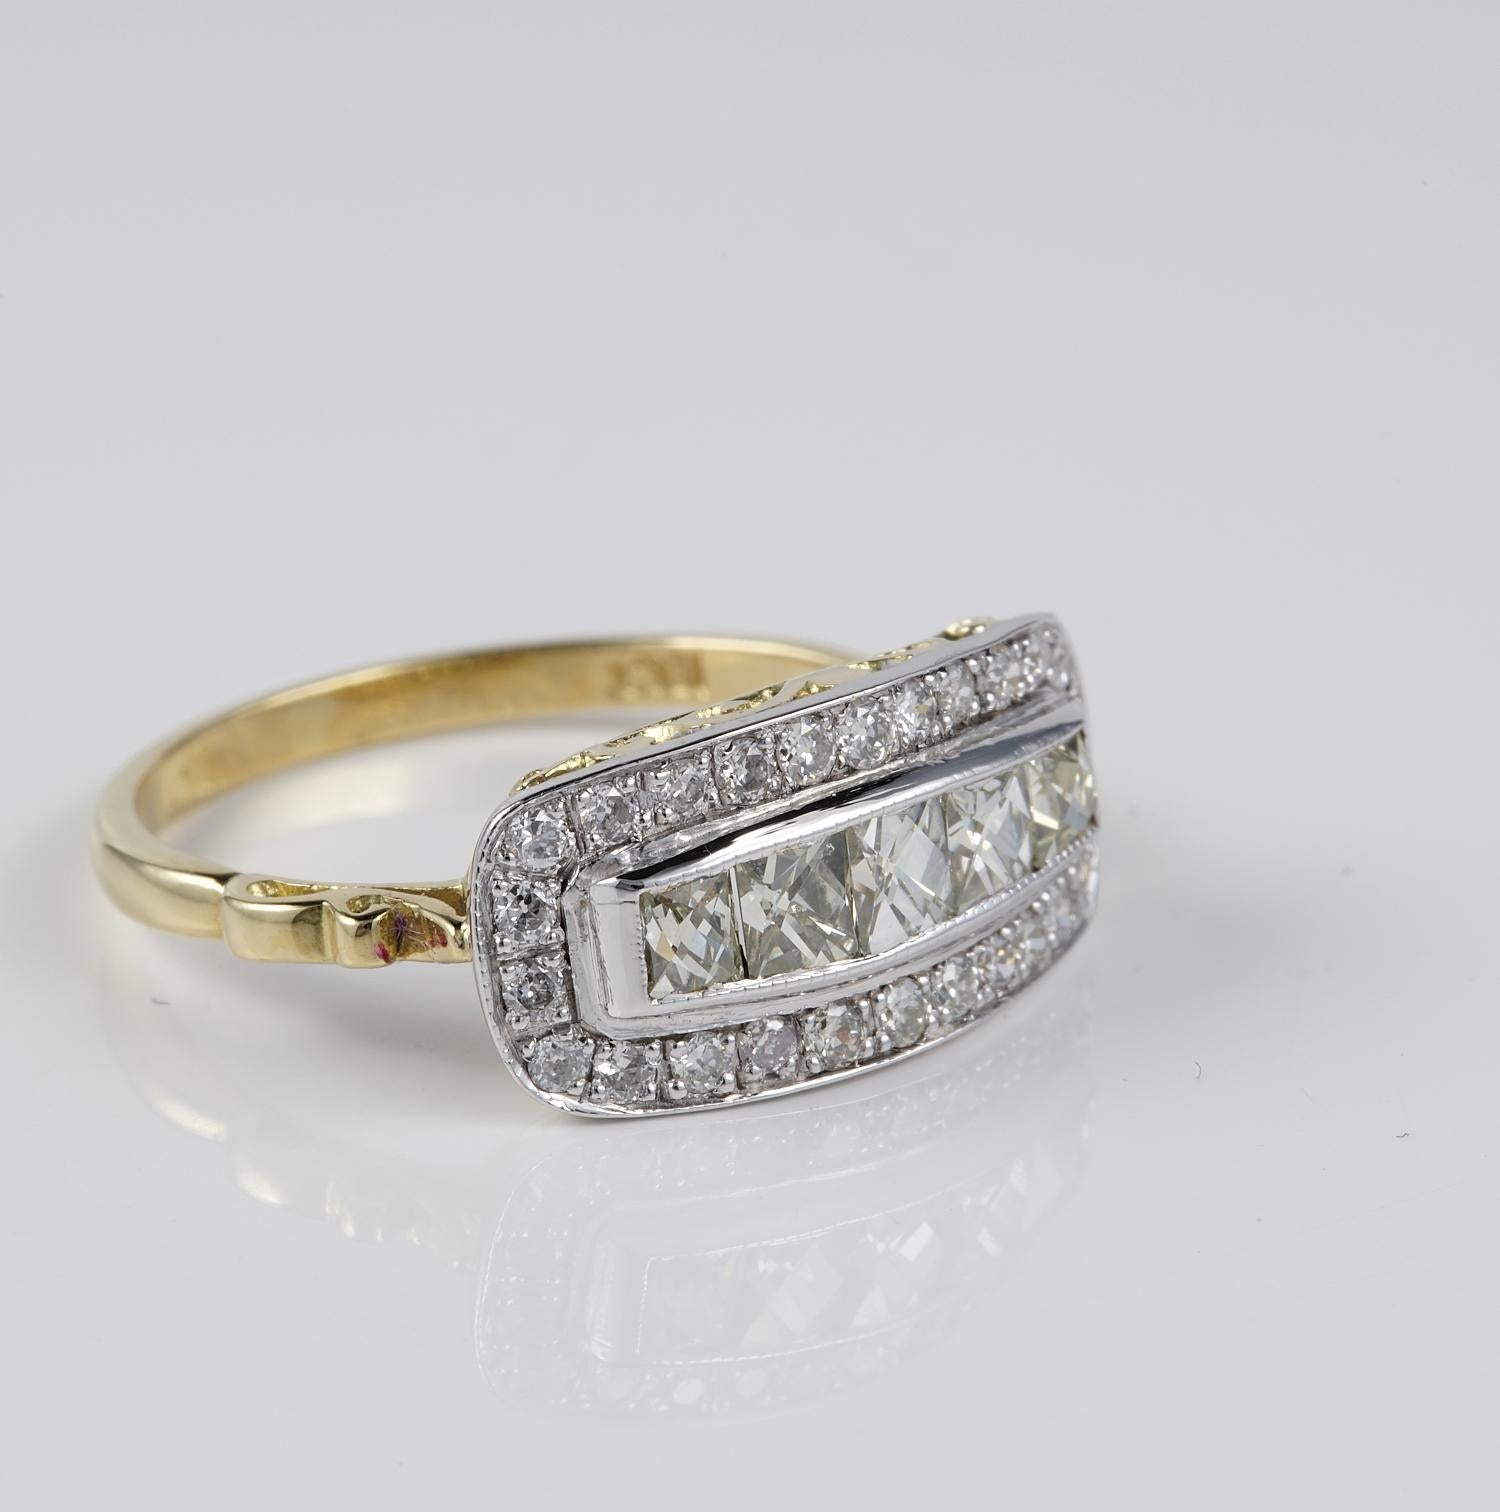 This pretty vintage ring is 1935 ca
Hand crafted of solid Platinum over the top with 18 KT yellow back under gallery and shank
Crown is set with a selection of five  French cut Diamonds totalling 1.20 CT /I VVS ; set in a frame of Swiss cut Diamonds